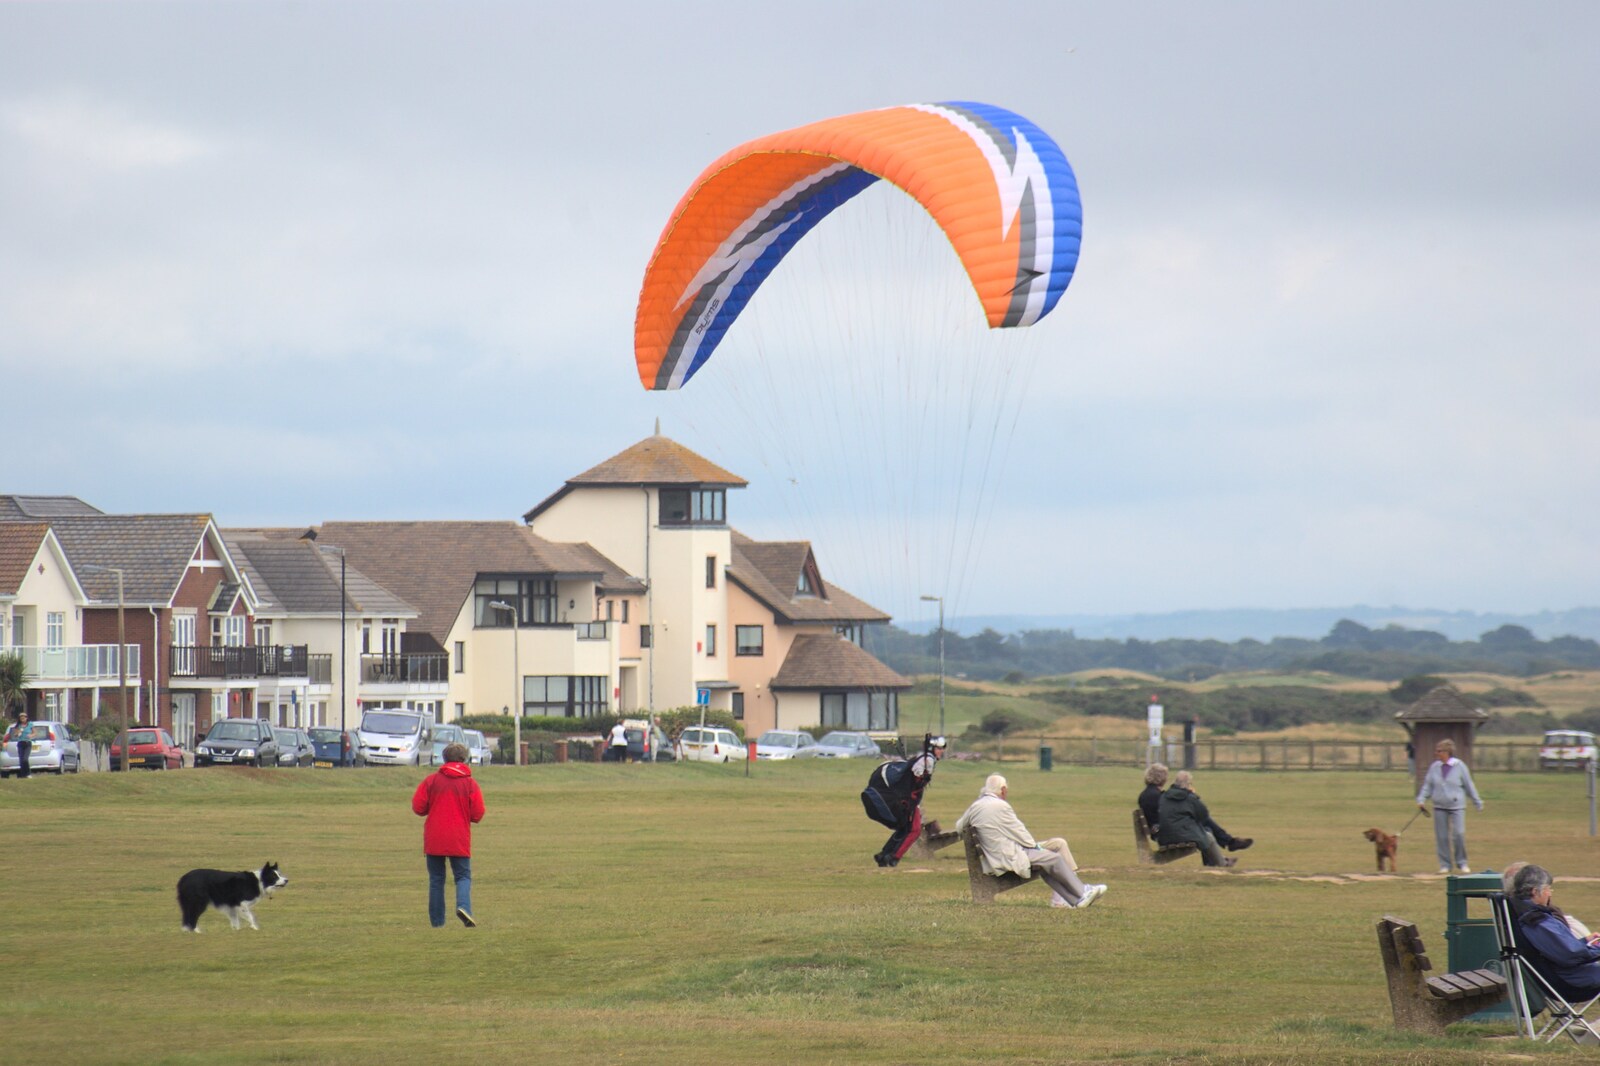 A parasailer lands on the clifftop from A Camper Van Odyssey: Oxford, Salisbury, New Forest and Barton-on-Sea - 19th June 2011